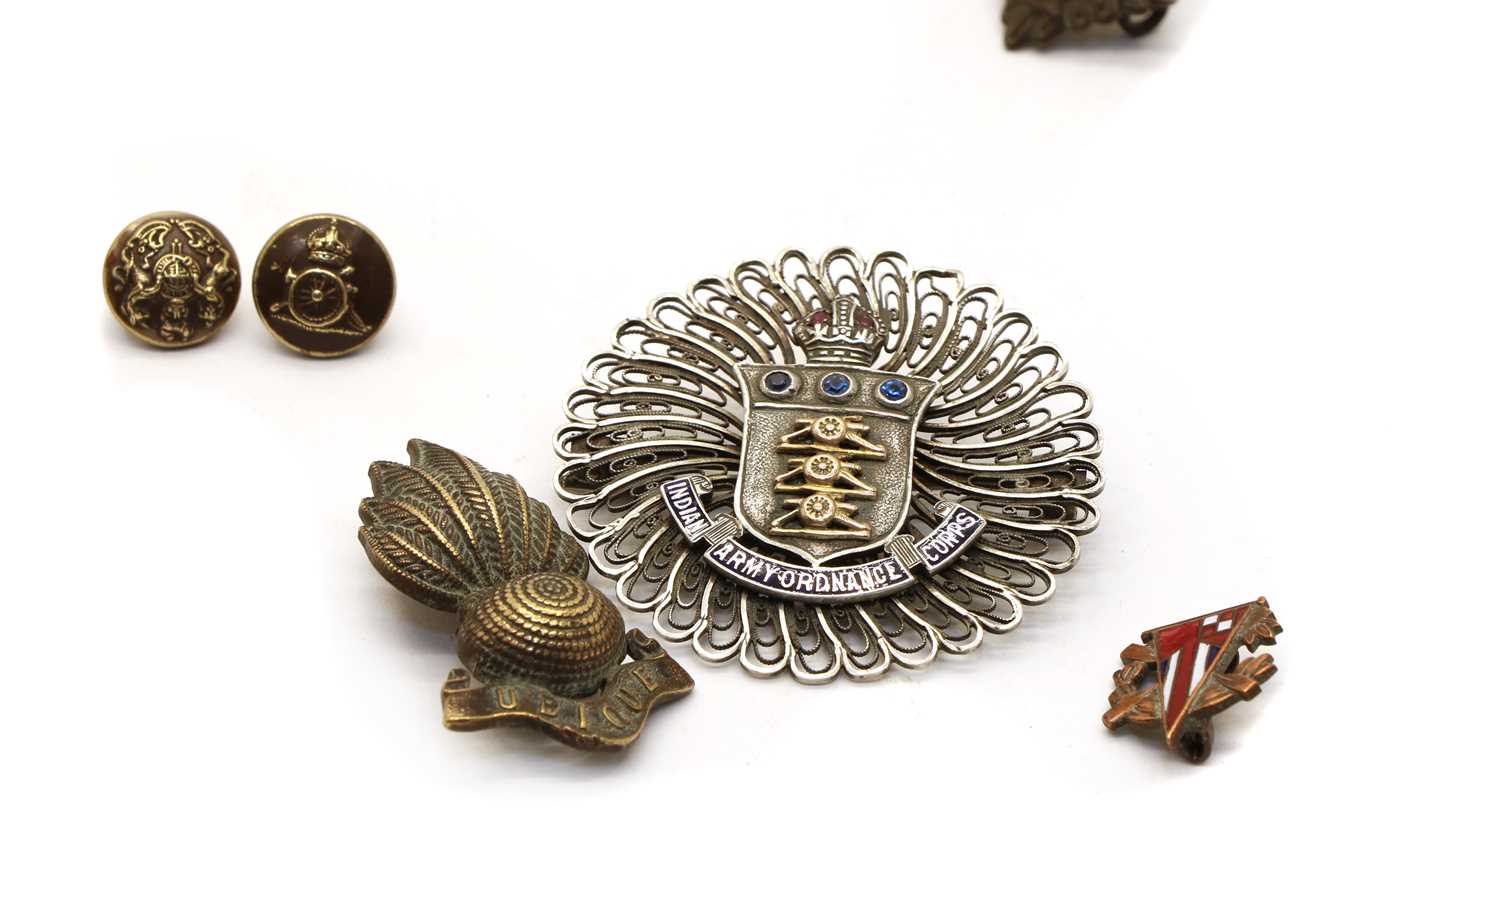 A collection of military uniform buttons, - Image 4 of 6